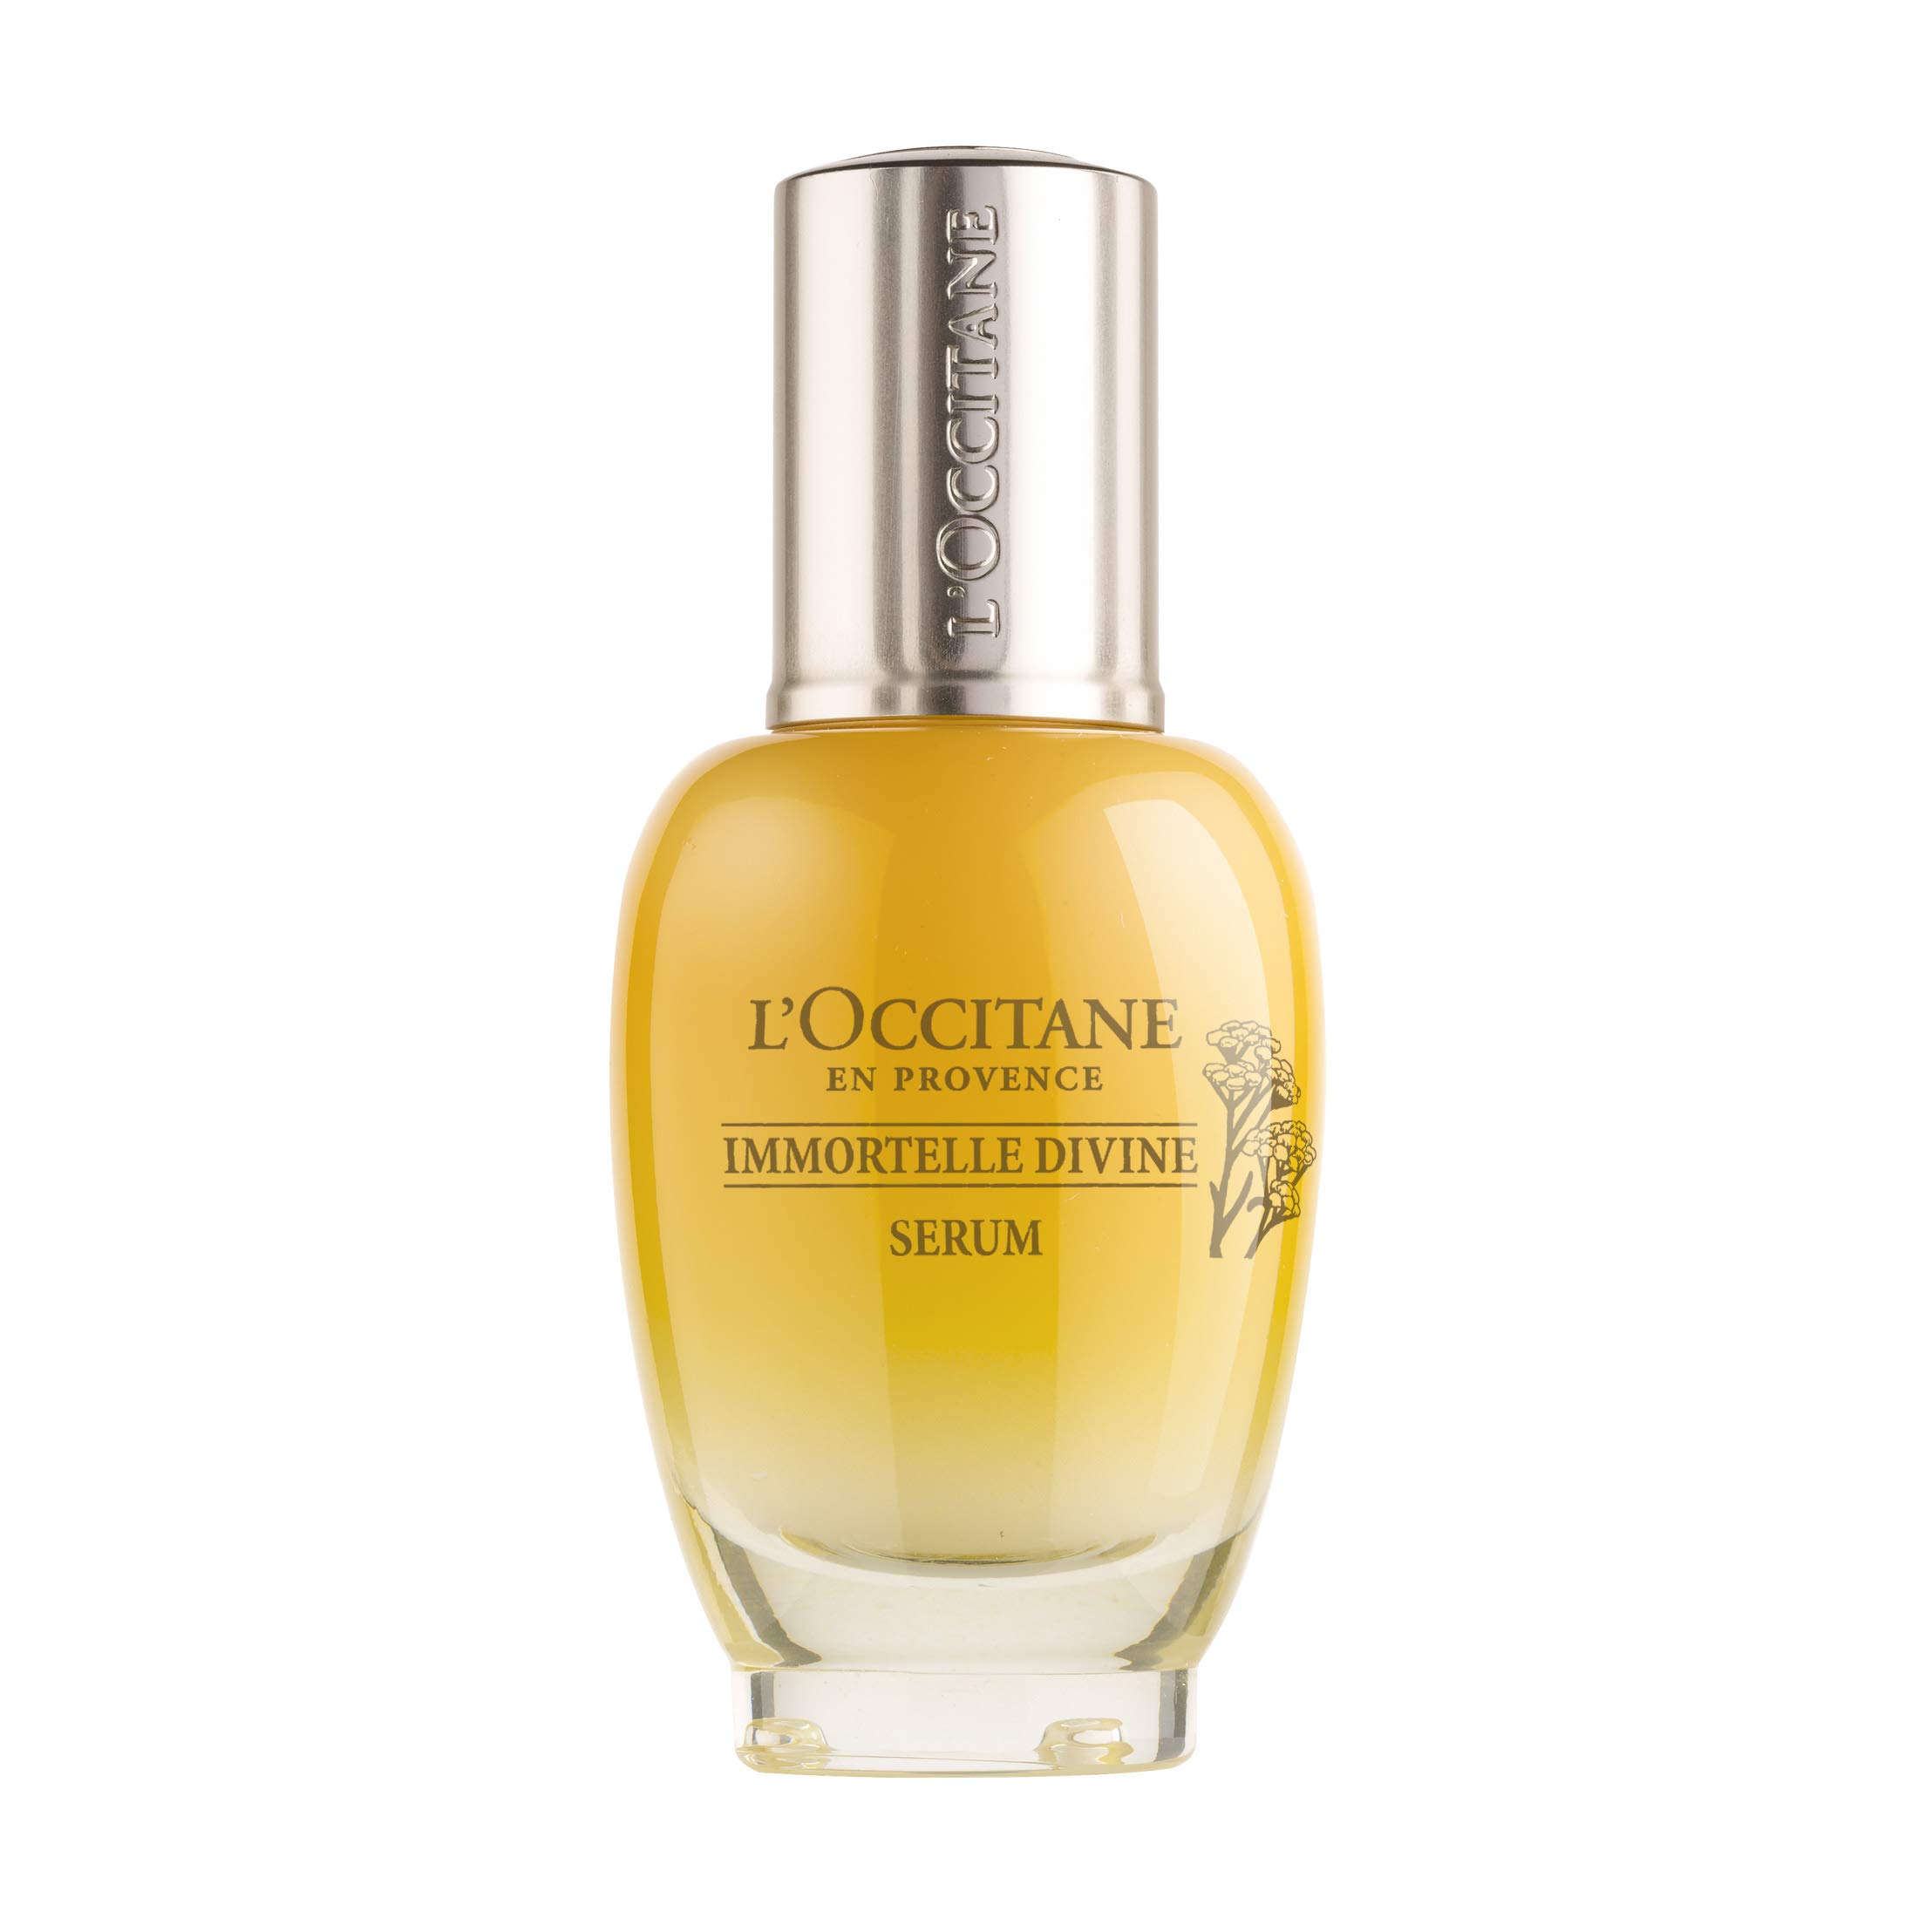 L\'Occitane L'Occitane Anti-Aging Immortelle Divine Face Serum for a Youthful and Radiant Glow, 1 fl. oz.